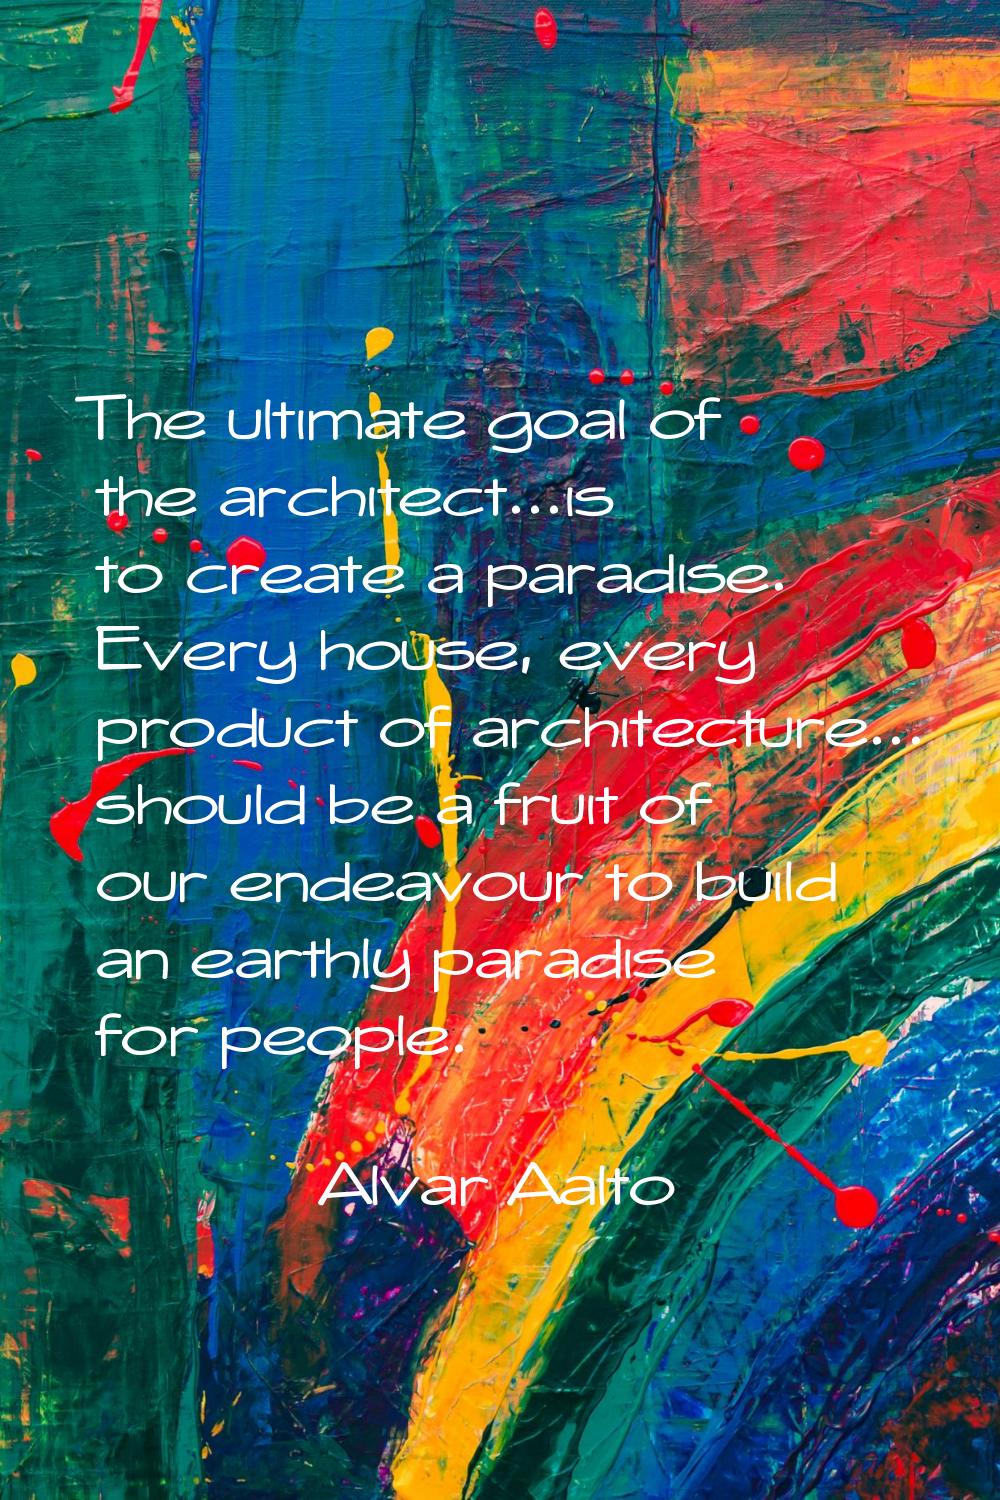 The ultimate goal of the architect...is to create a paradise. Every house, every product of archite